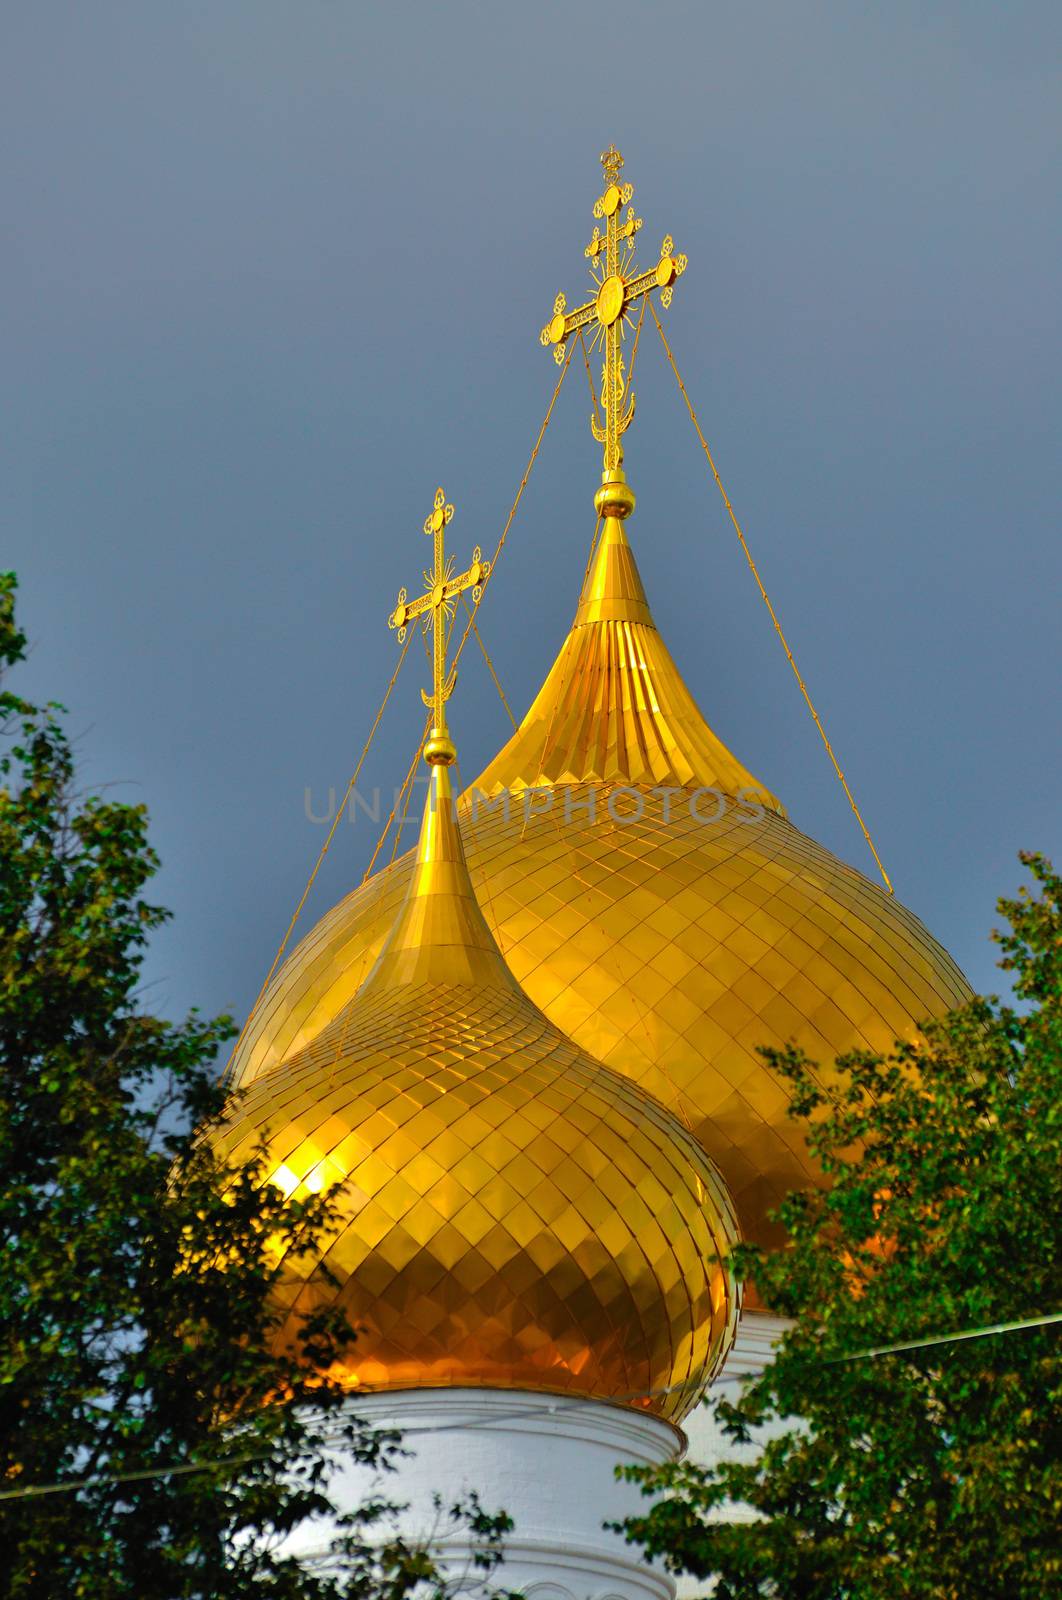 Assumption orthodox Cathedral with golden domes, Yaroslavl, Russia by Eagle2308